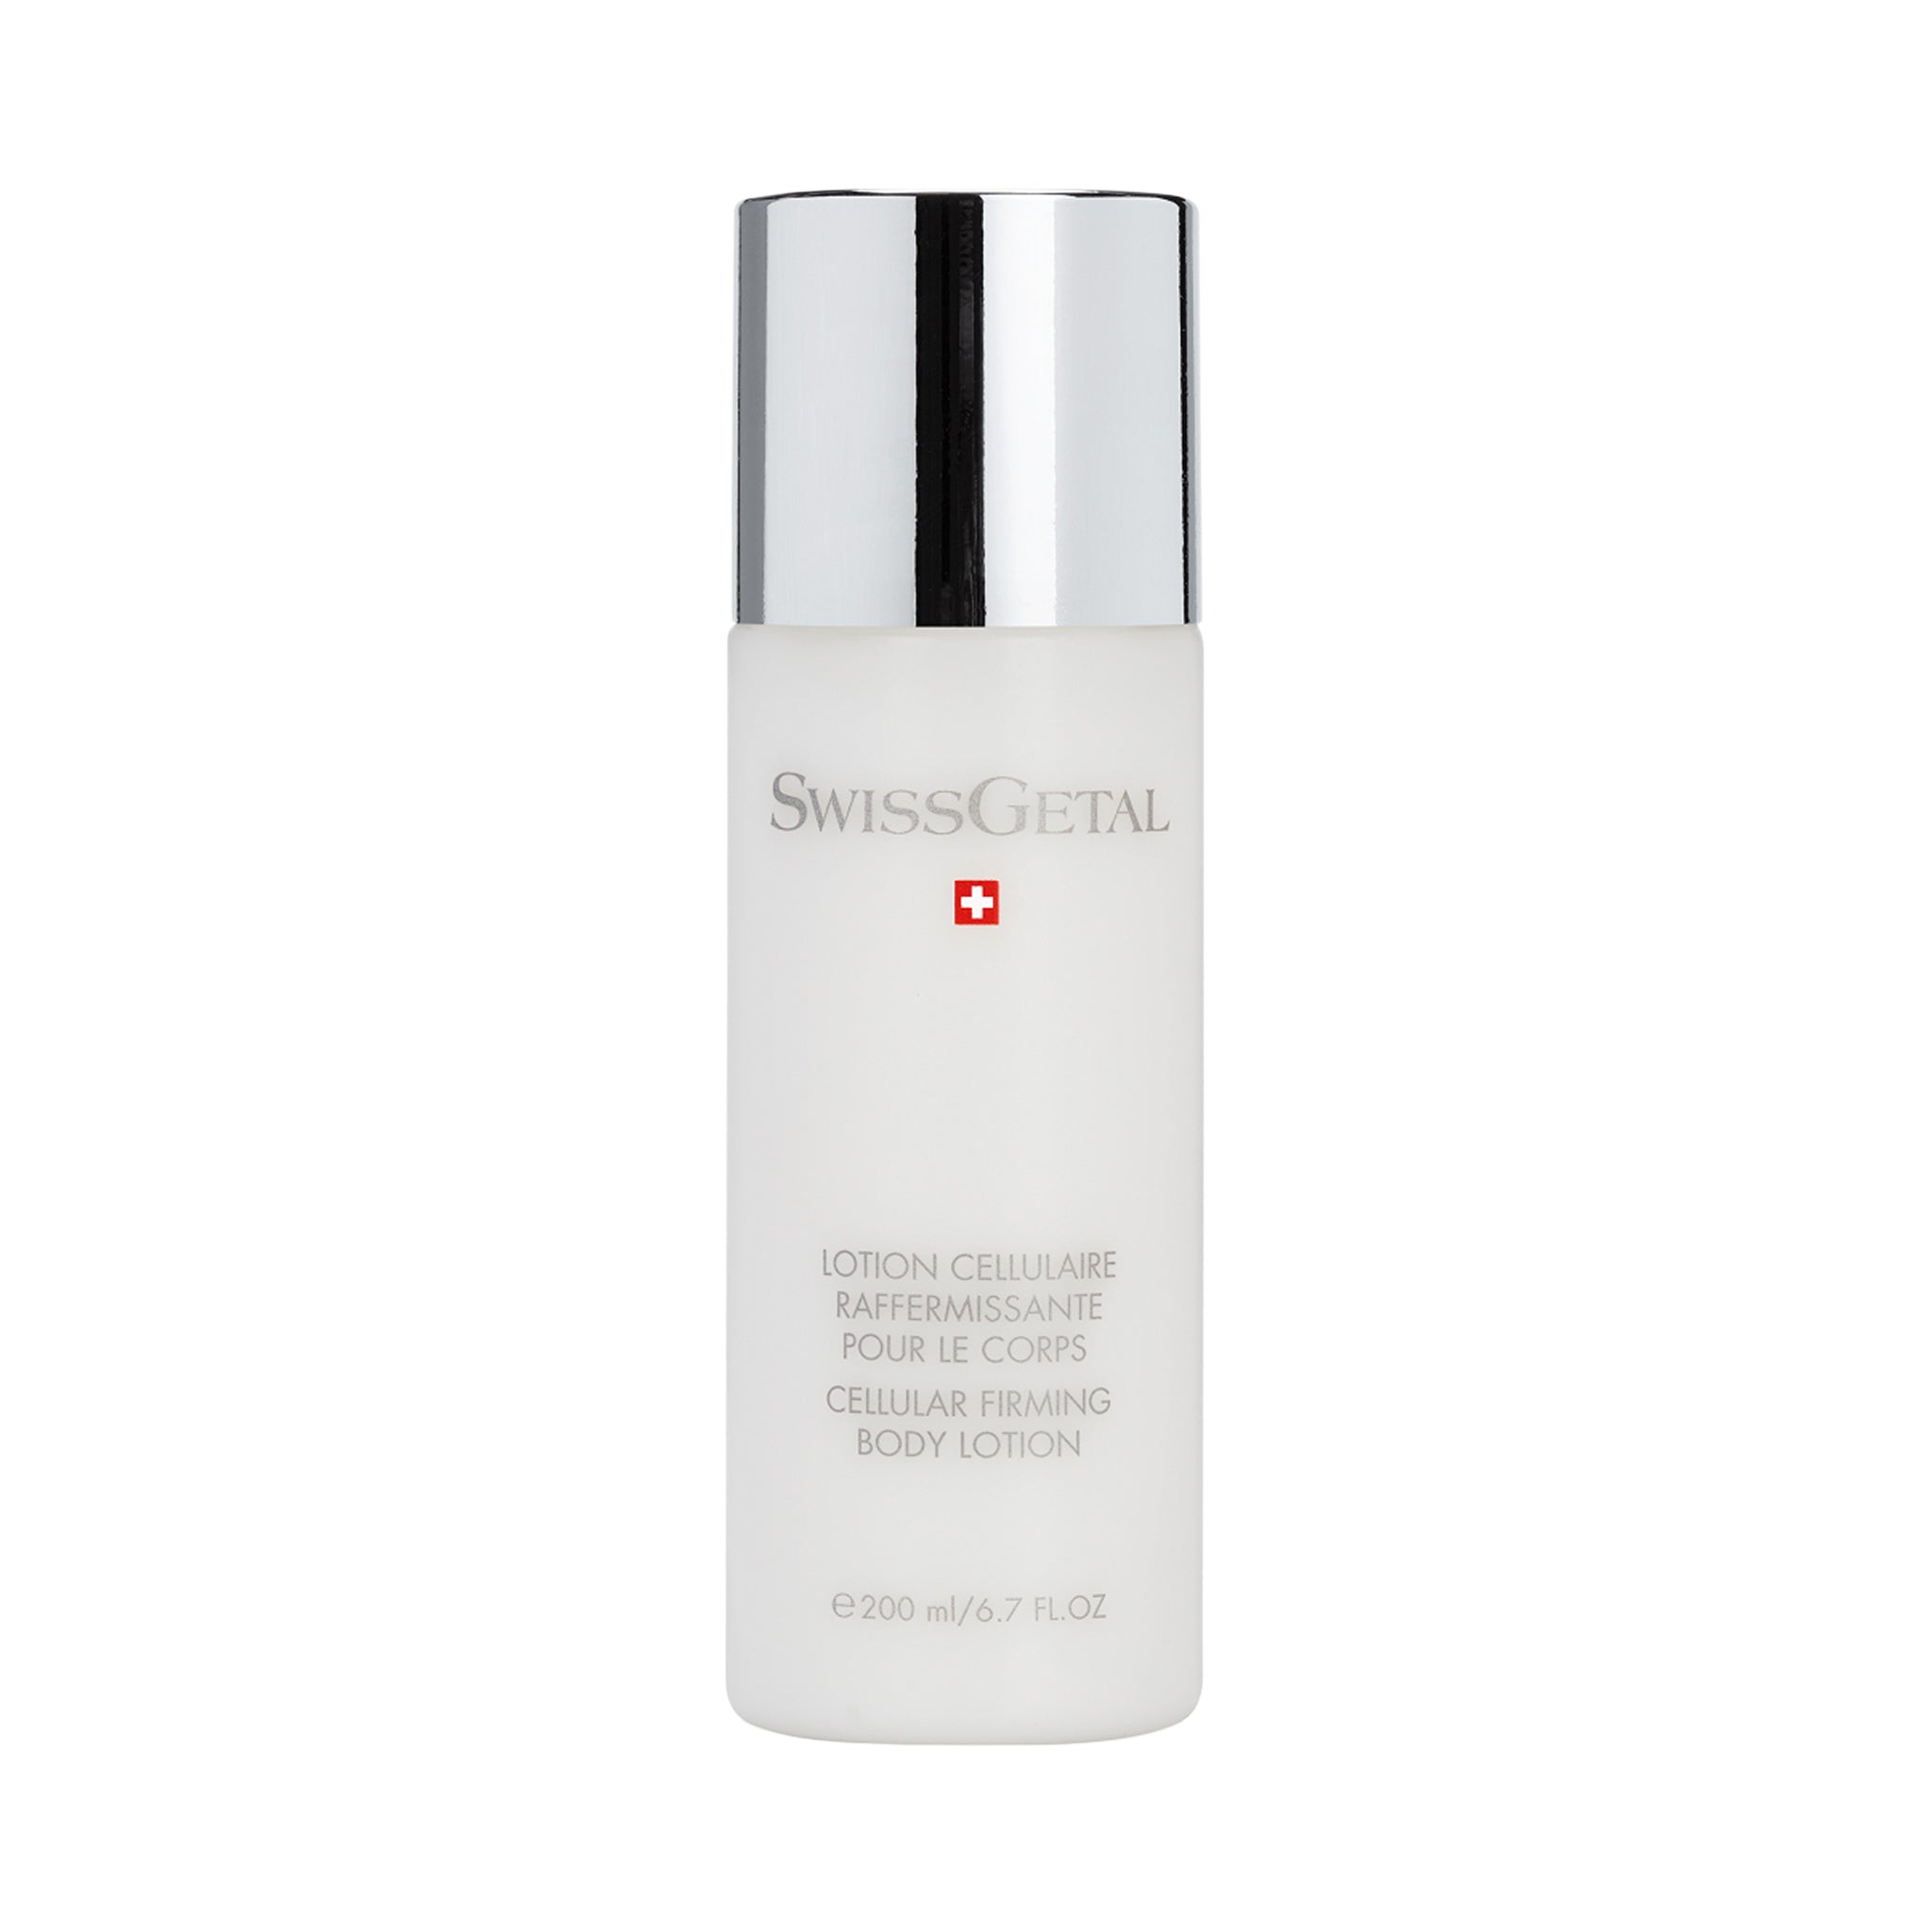 Cellular Firming Body Lotion